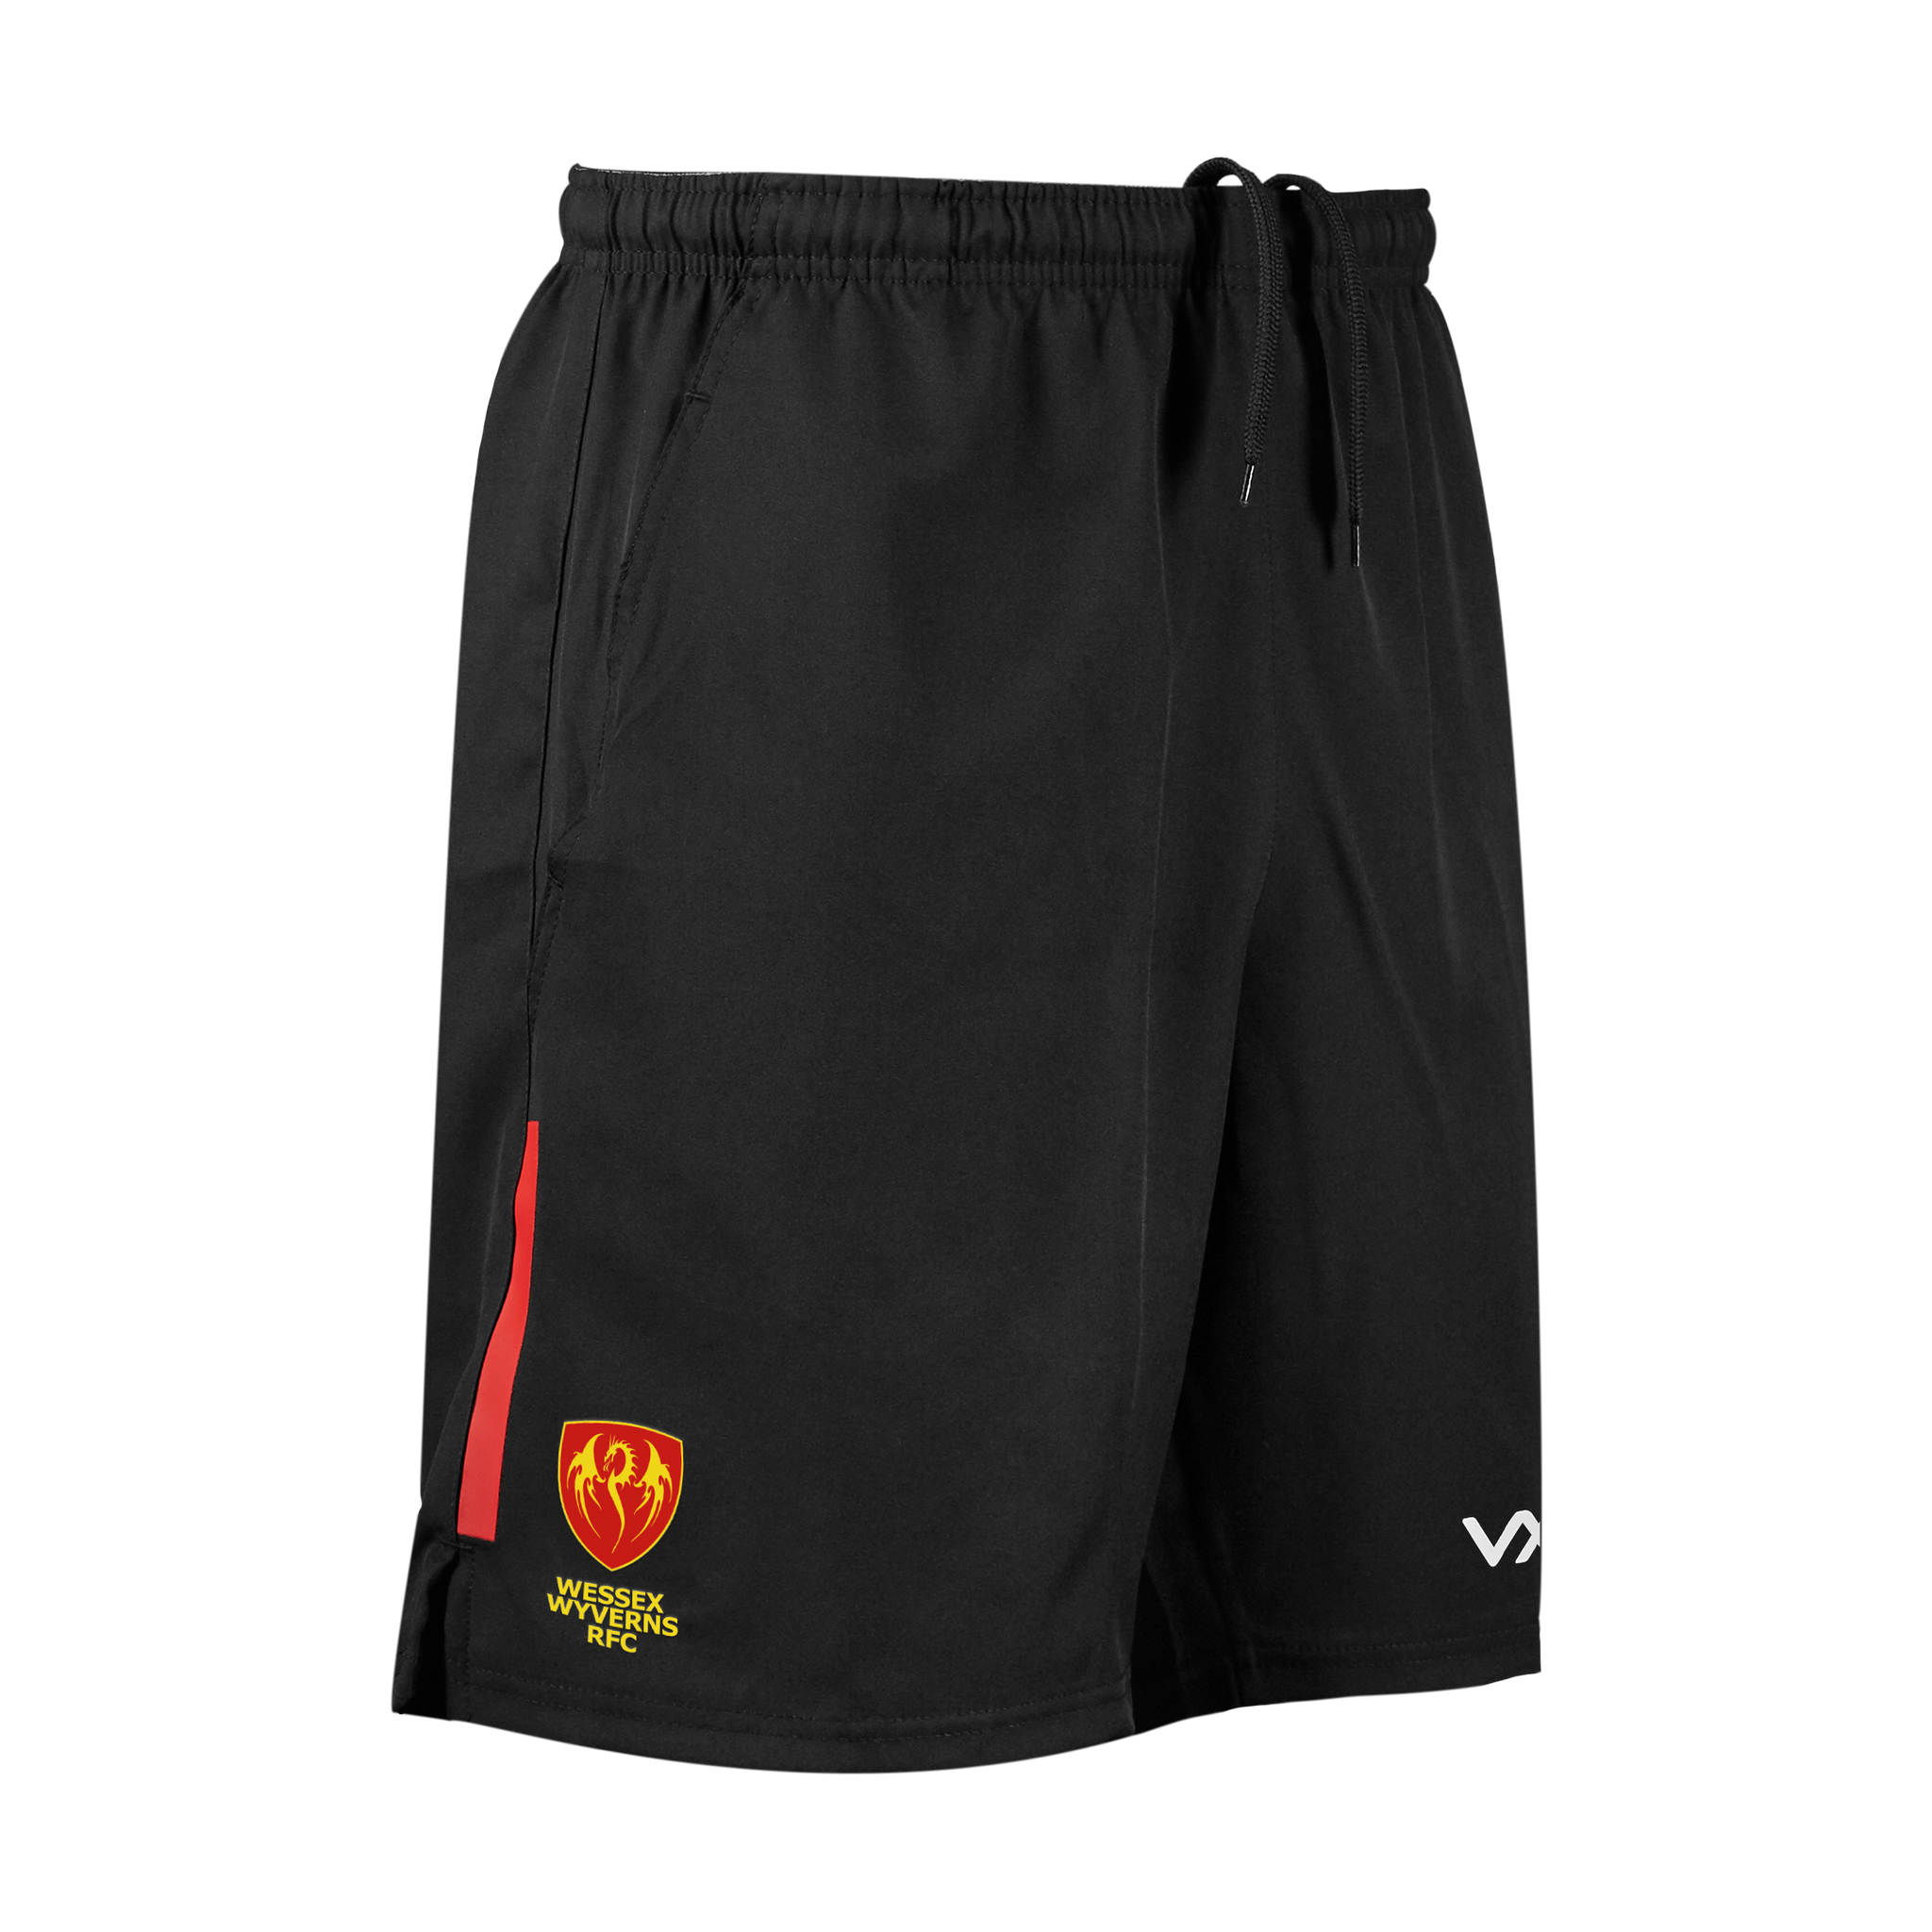 Wessex Wyverns RFC Fortis Travel Youth Shorts Black/Red